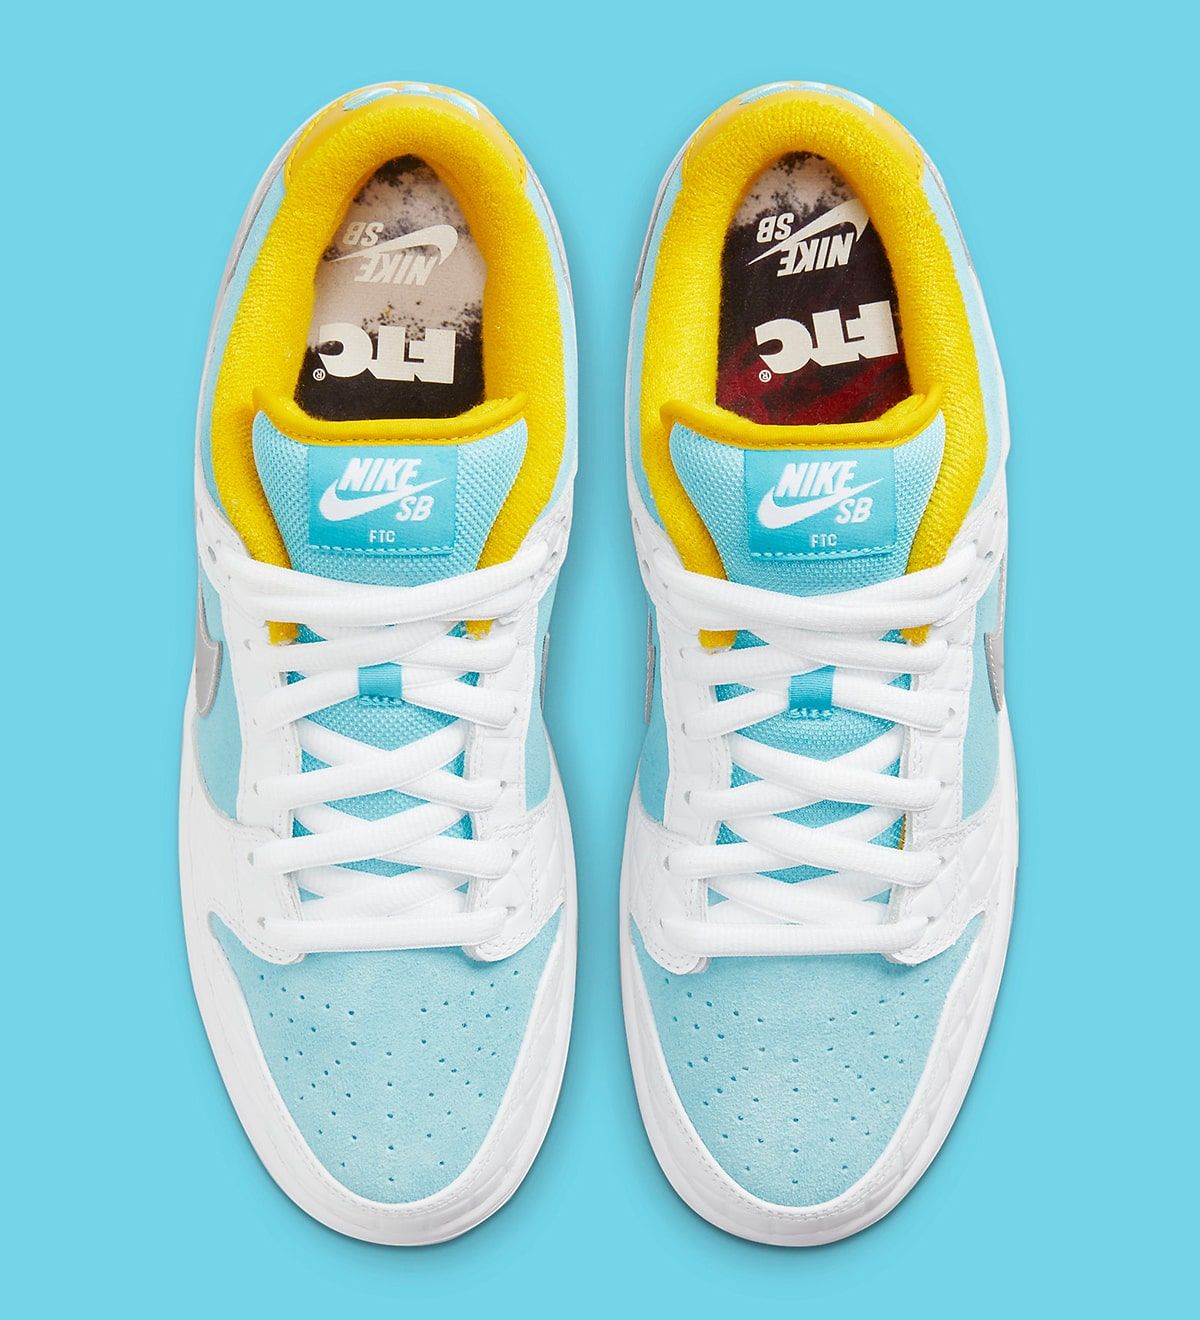 Where to Buy the FTC x Nike SB Dunk Low 